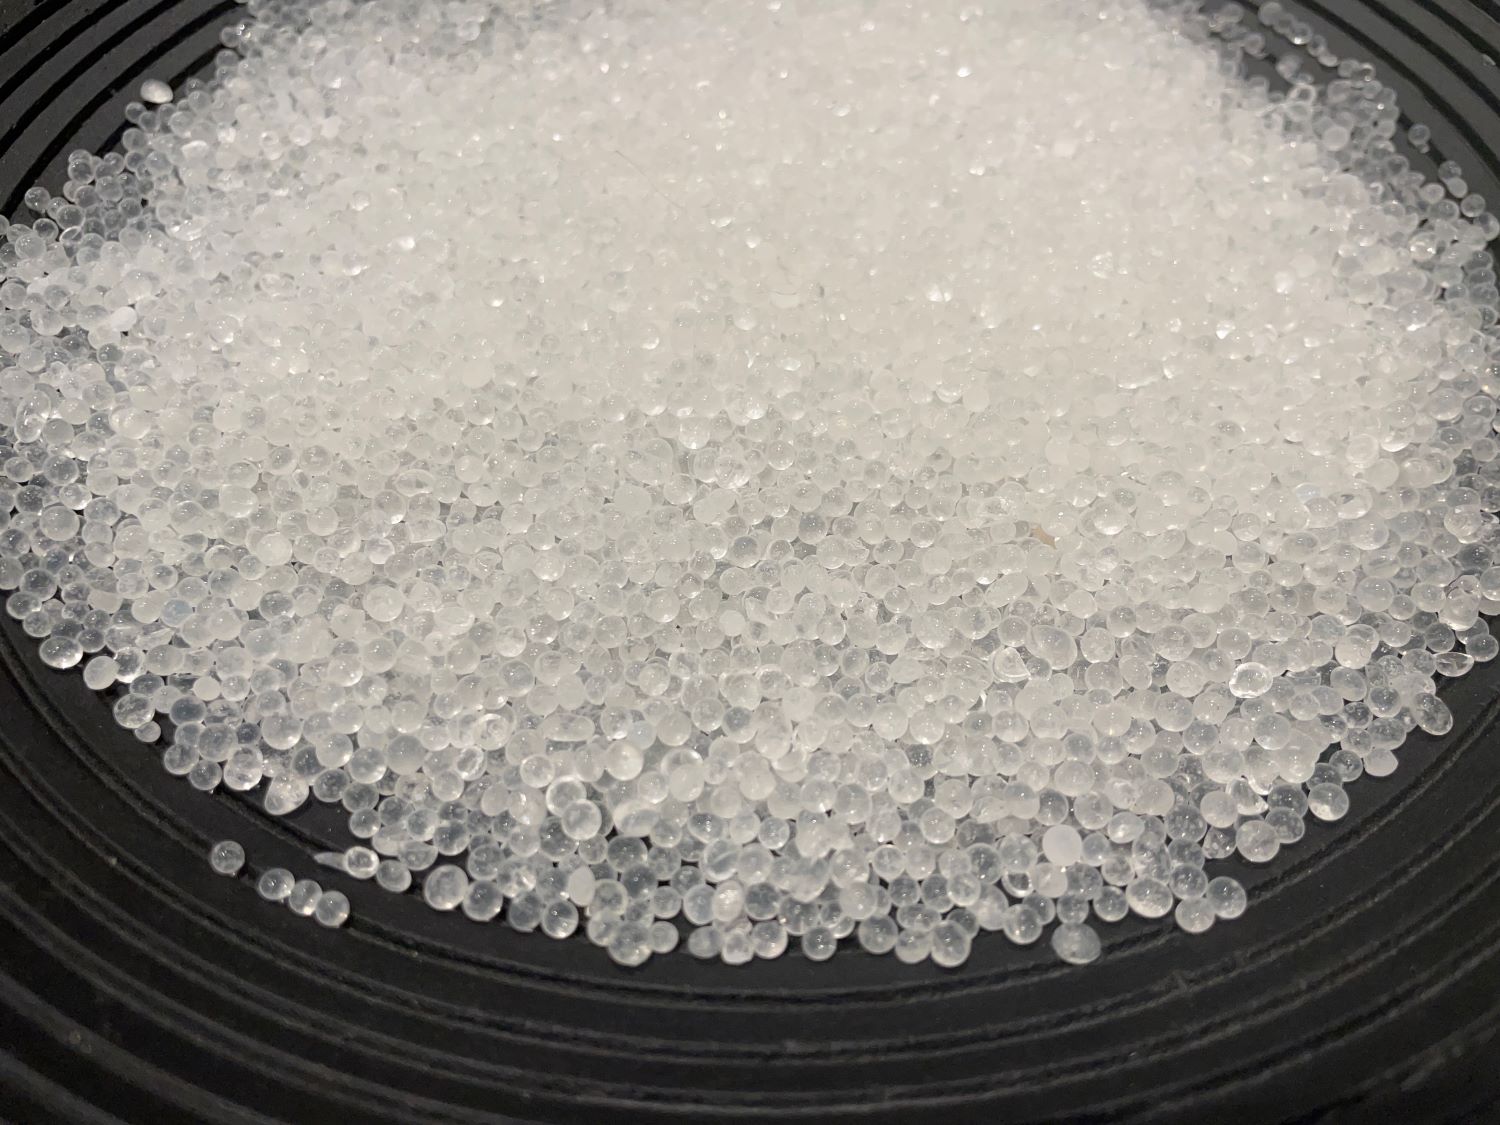 White Silica Gel Beads - Non-Toxic Desiccant Bags